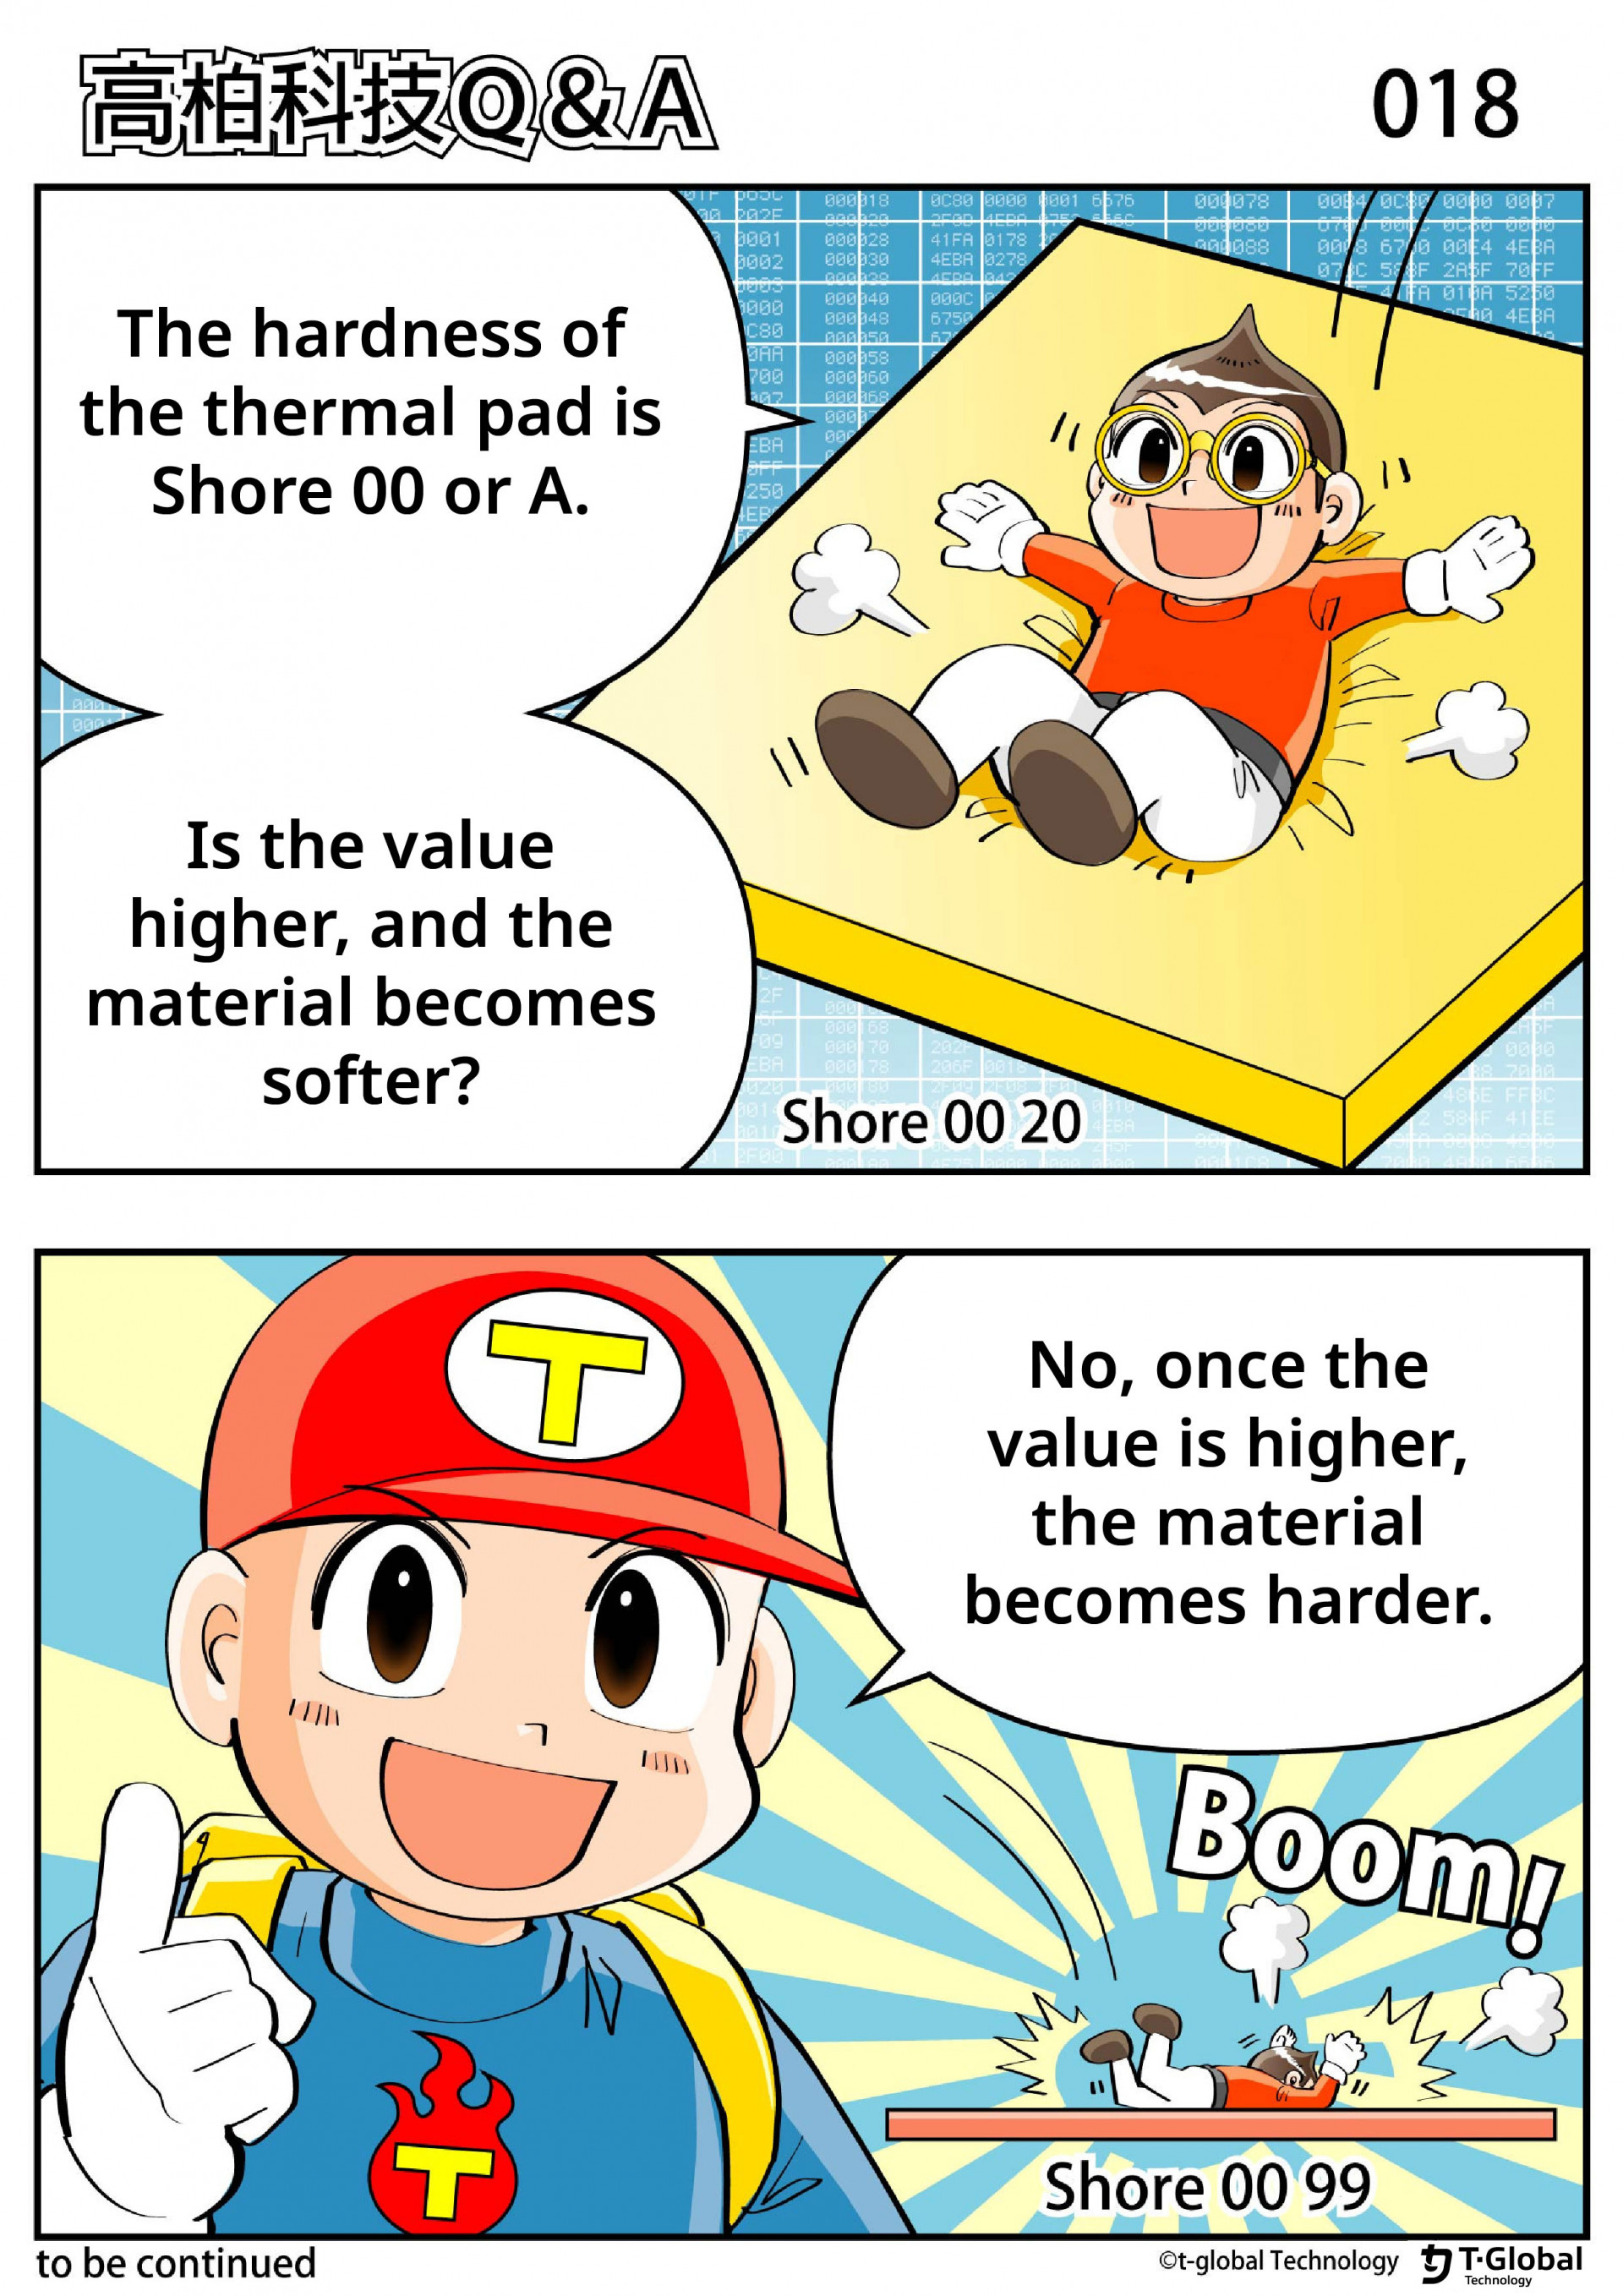 The hardness of the thermal pad is Shore 00 or A. 